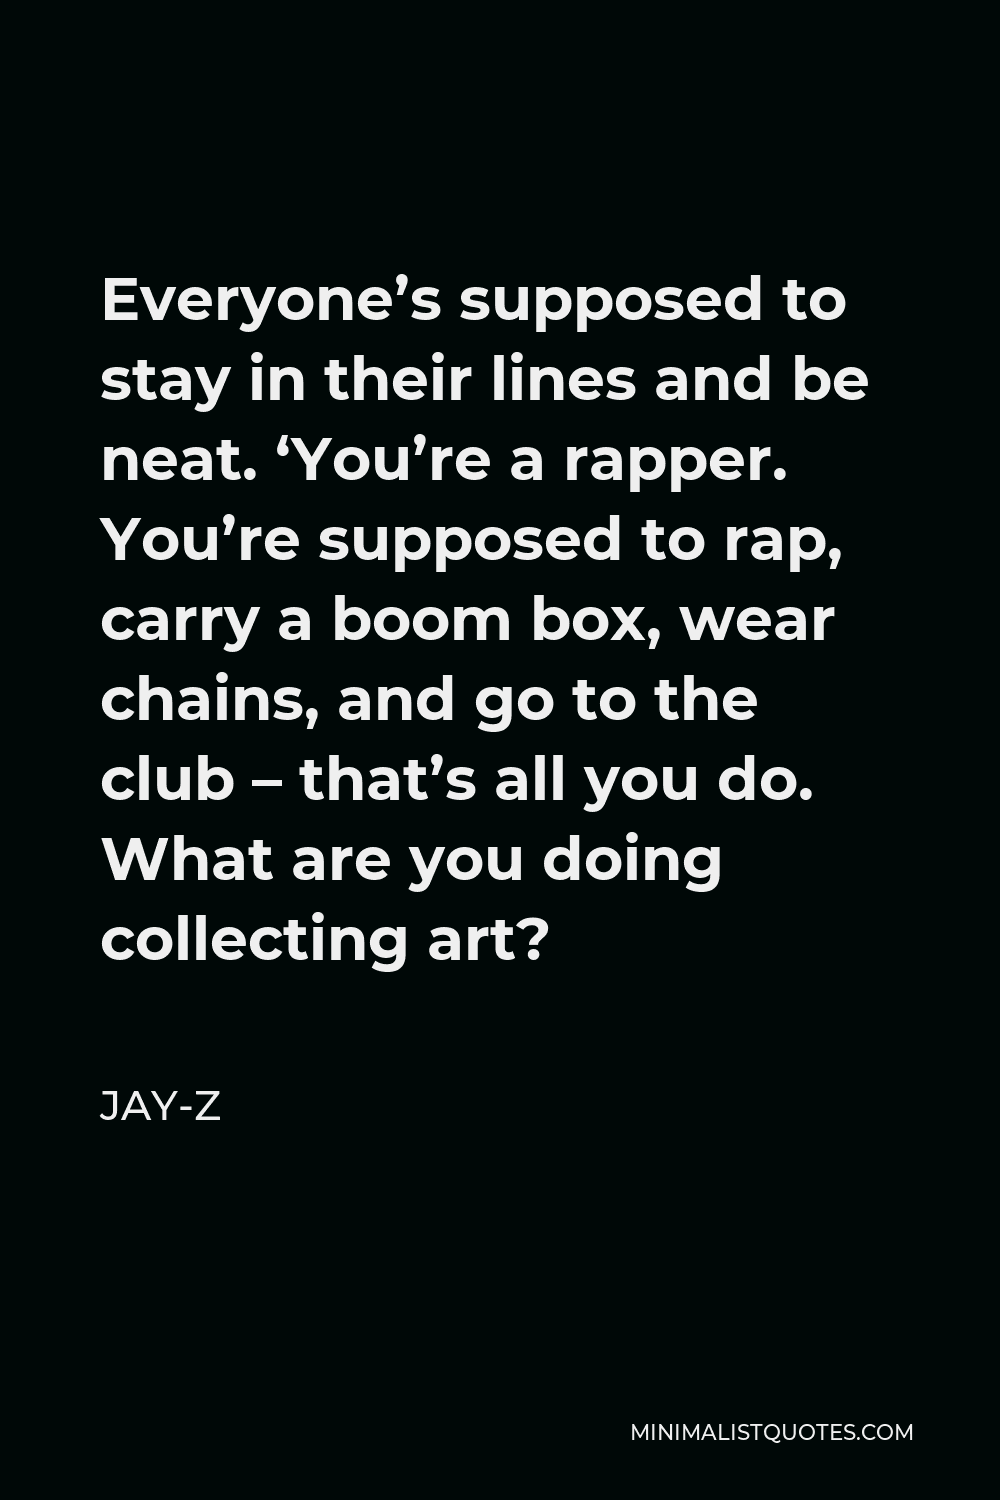 Jay-Z Quote - Everyone’s supposed to stay in their lines and be neat. ‘You’re a rapper. You’re supposed to rap, carry a boom box, wear chains, and go to the club – that’s all you do. What are you doing collecting art?